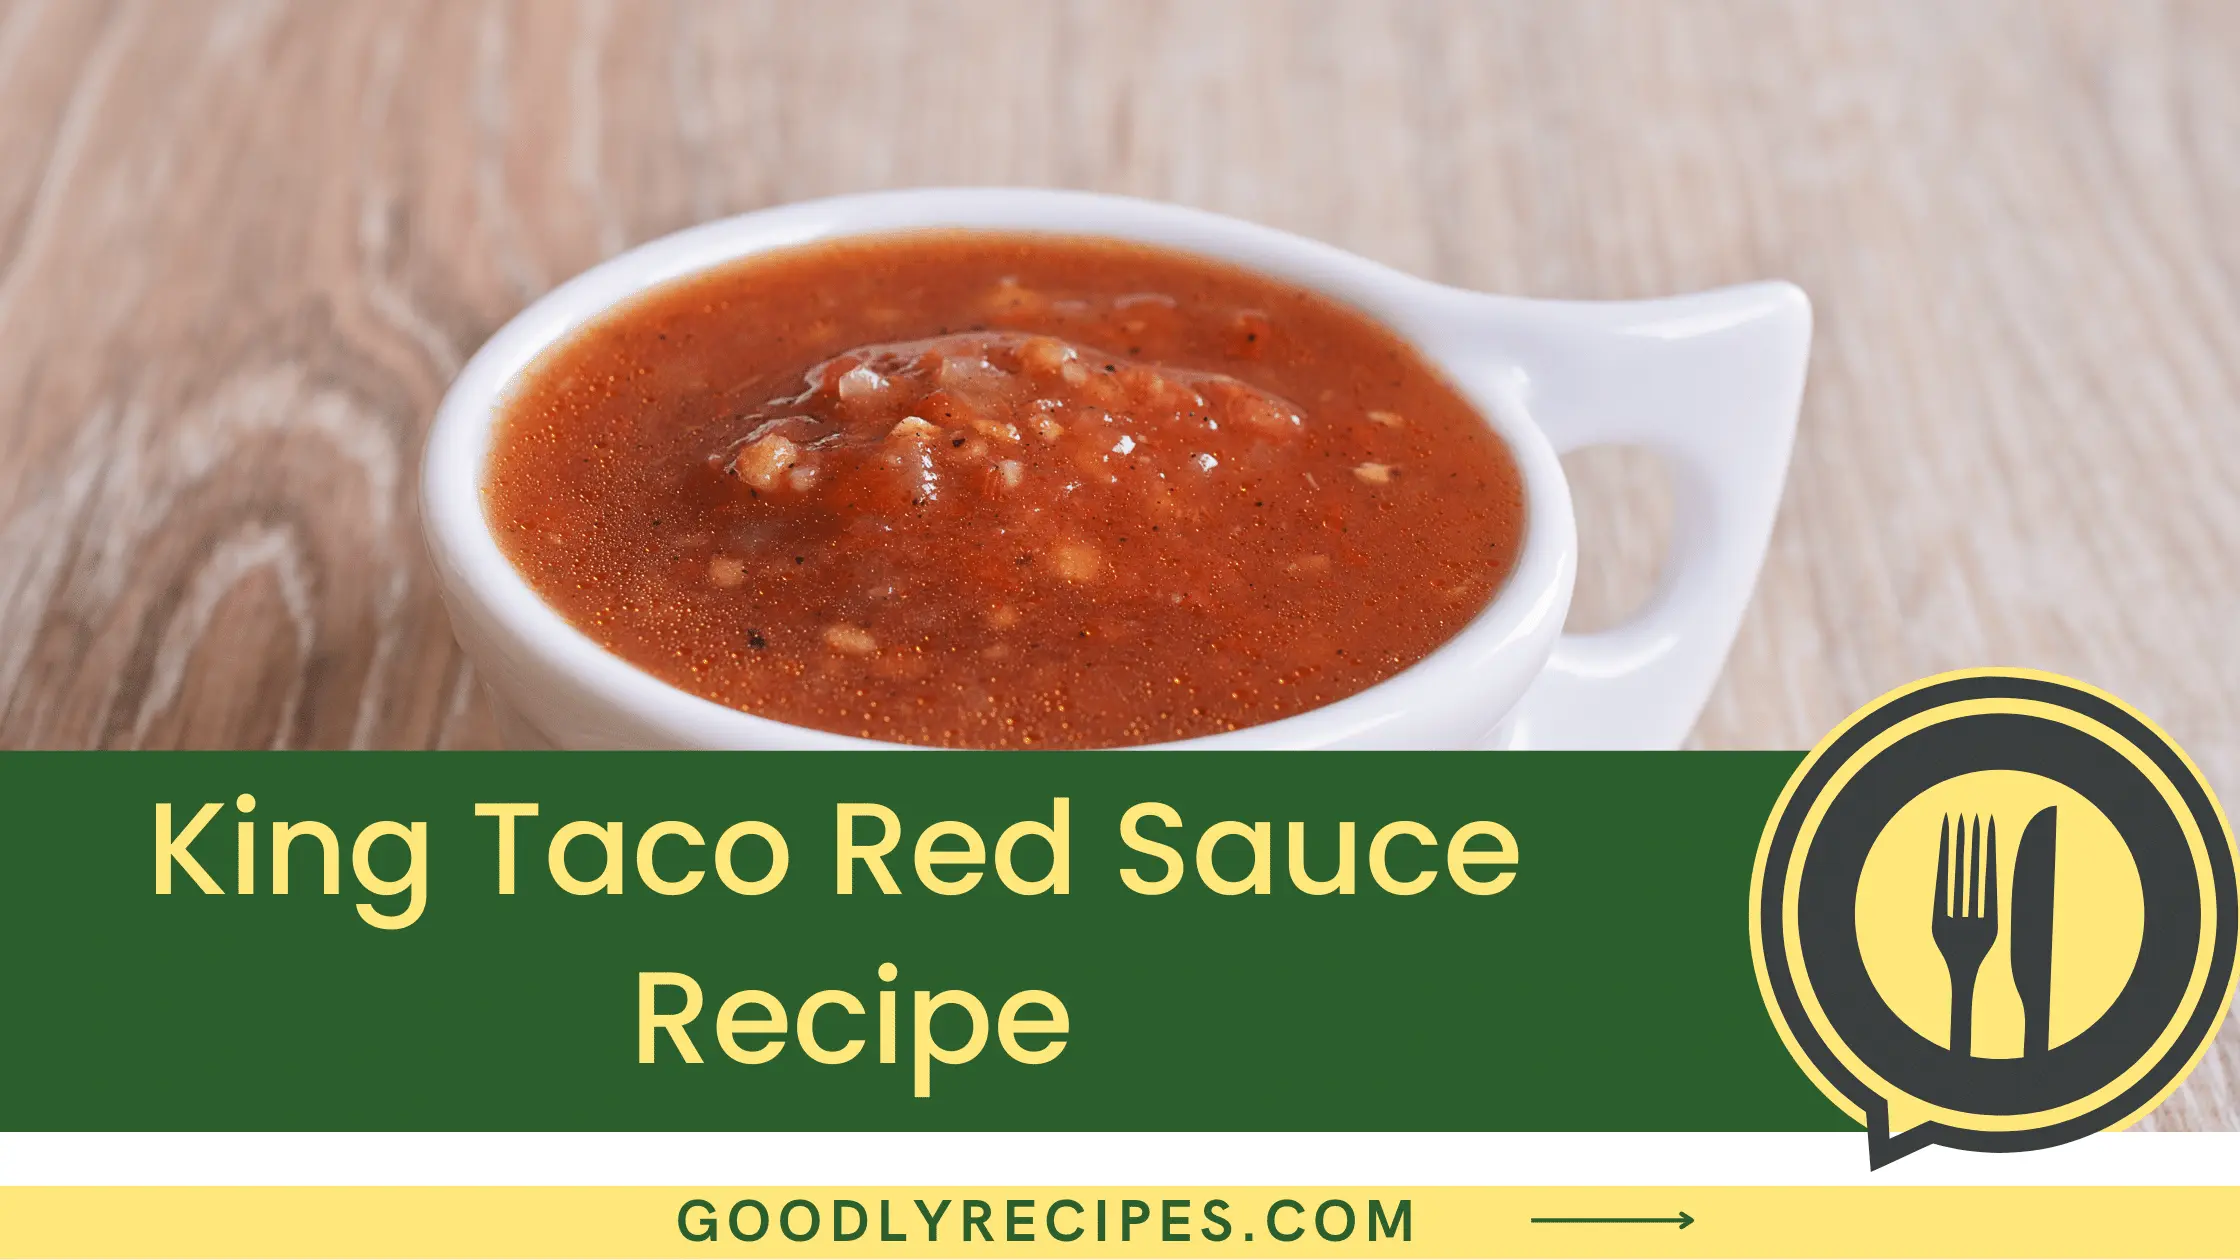 What is King Taco Red Sauce?